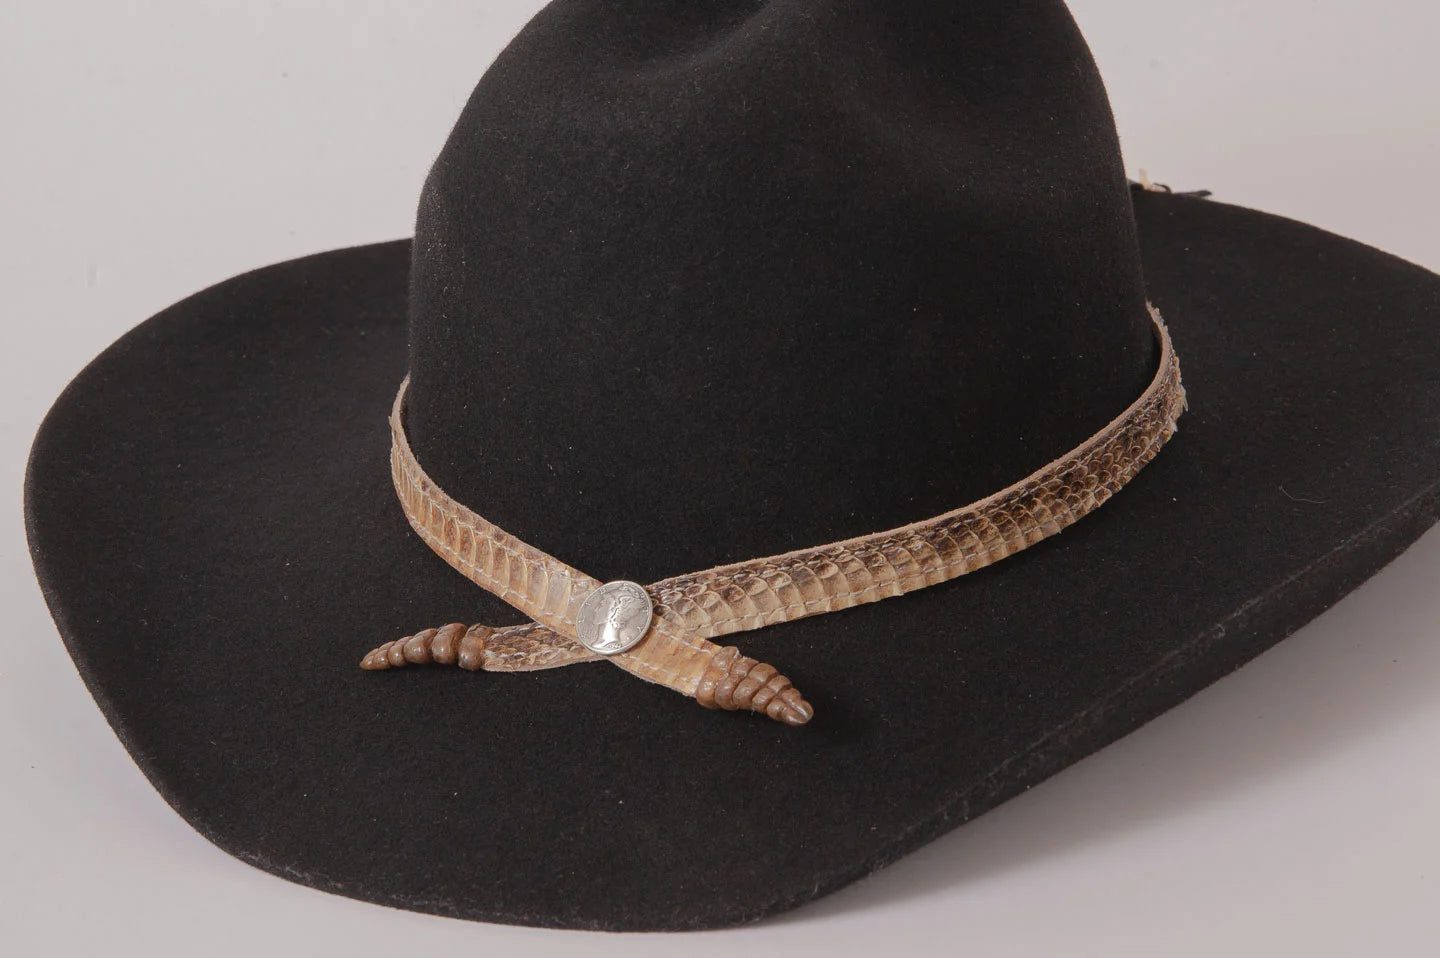 Cowboy hat with the Rattlesnake hat band by American Hat Makers